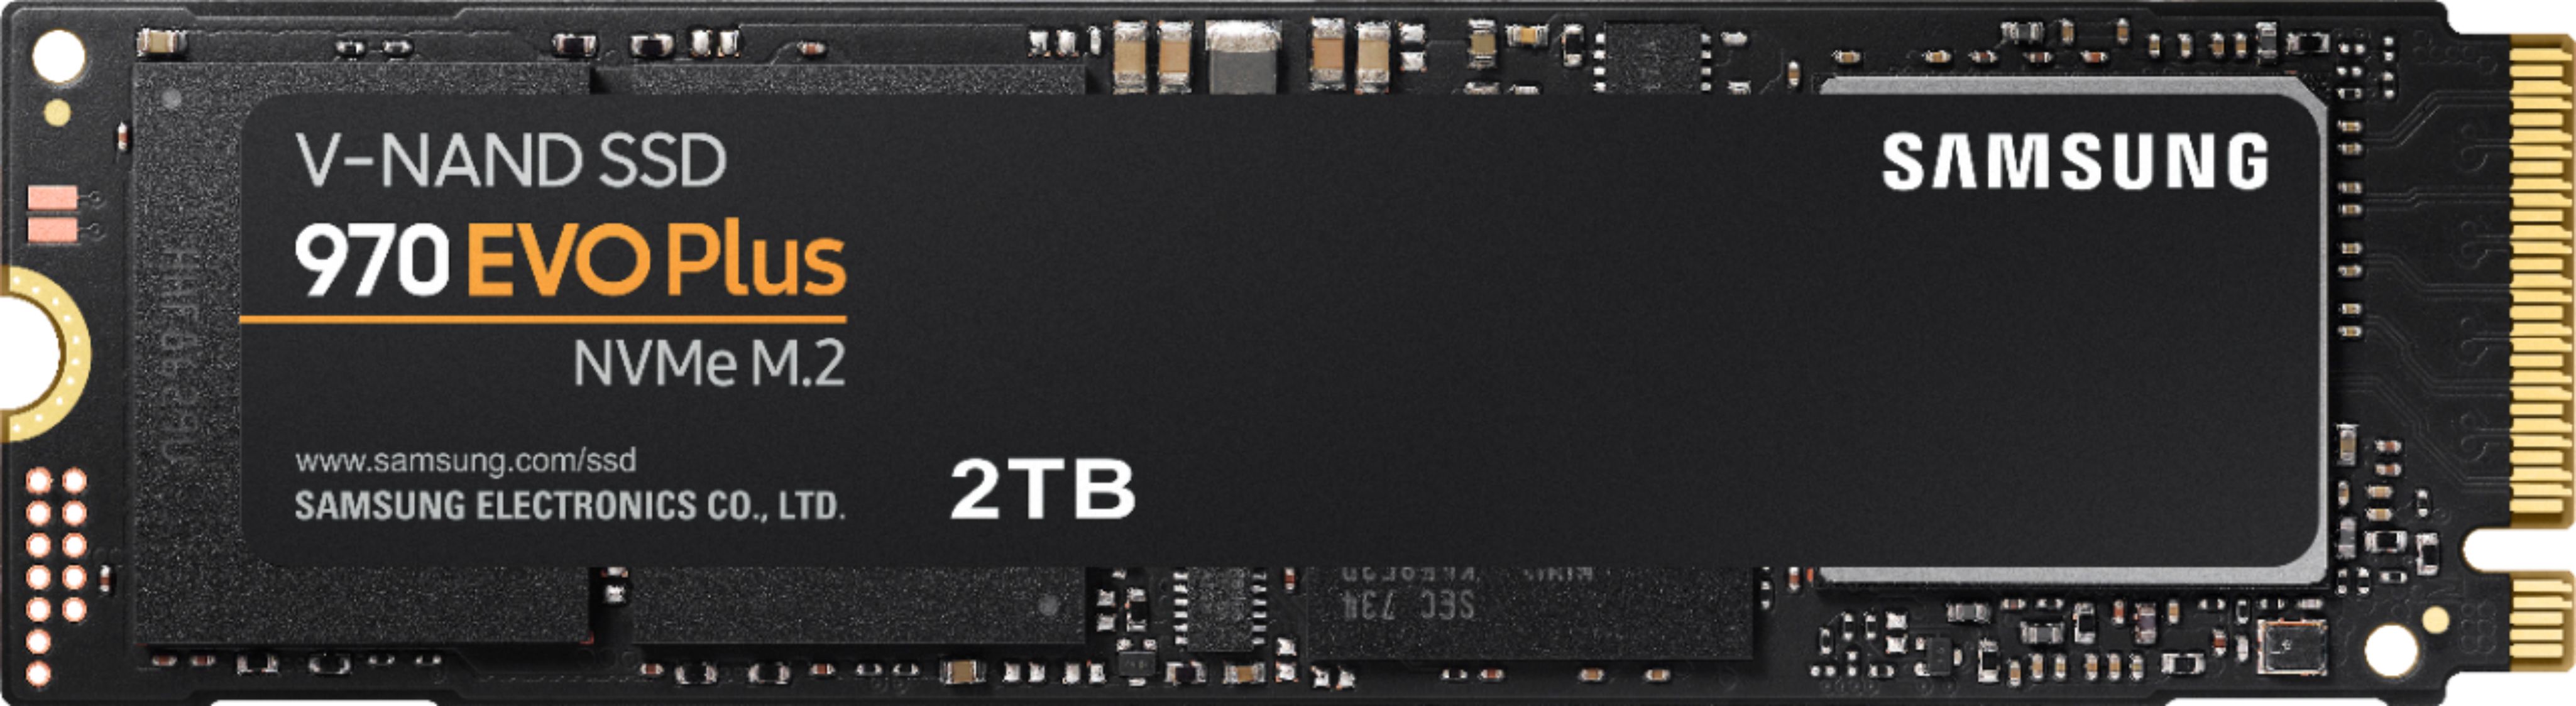 SAMSUNG HD SSD M.2 2TB 970 EVO Plus 2TB MZ-V7S2T0BW NVME 3500 MB/S 